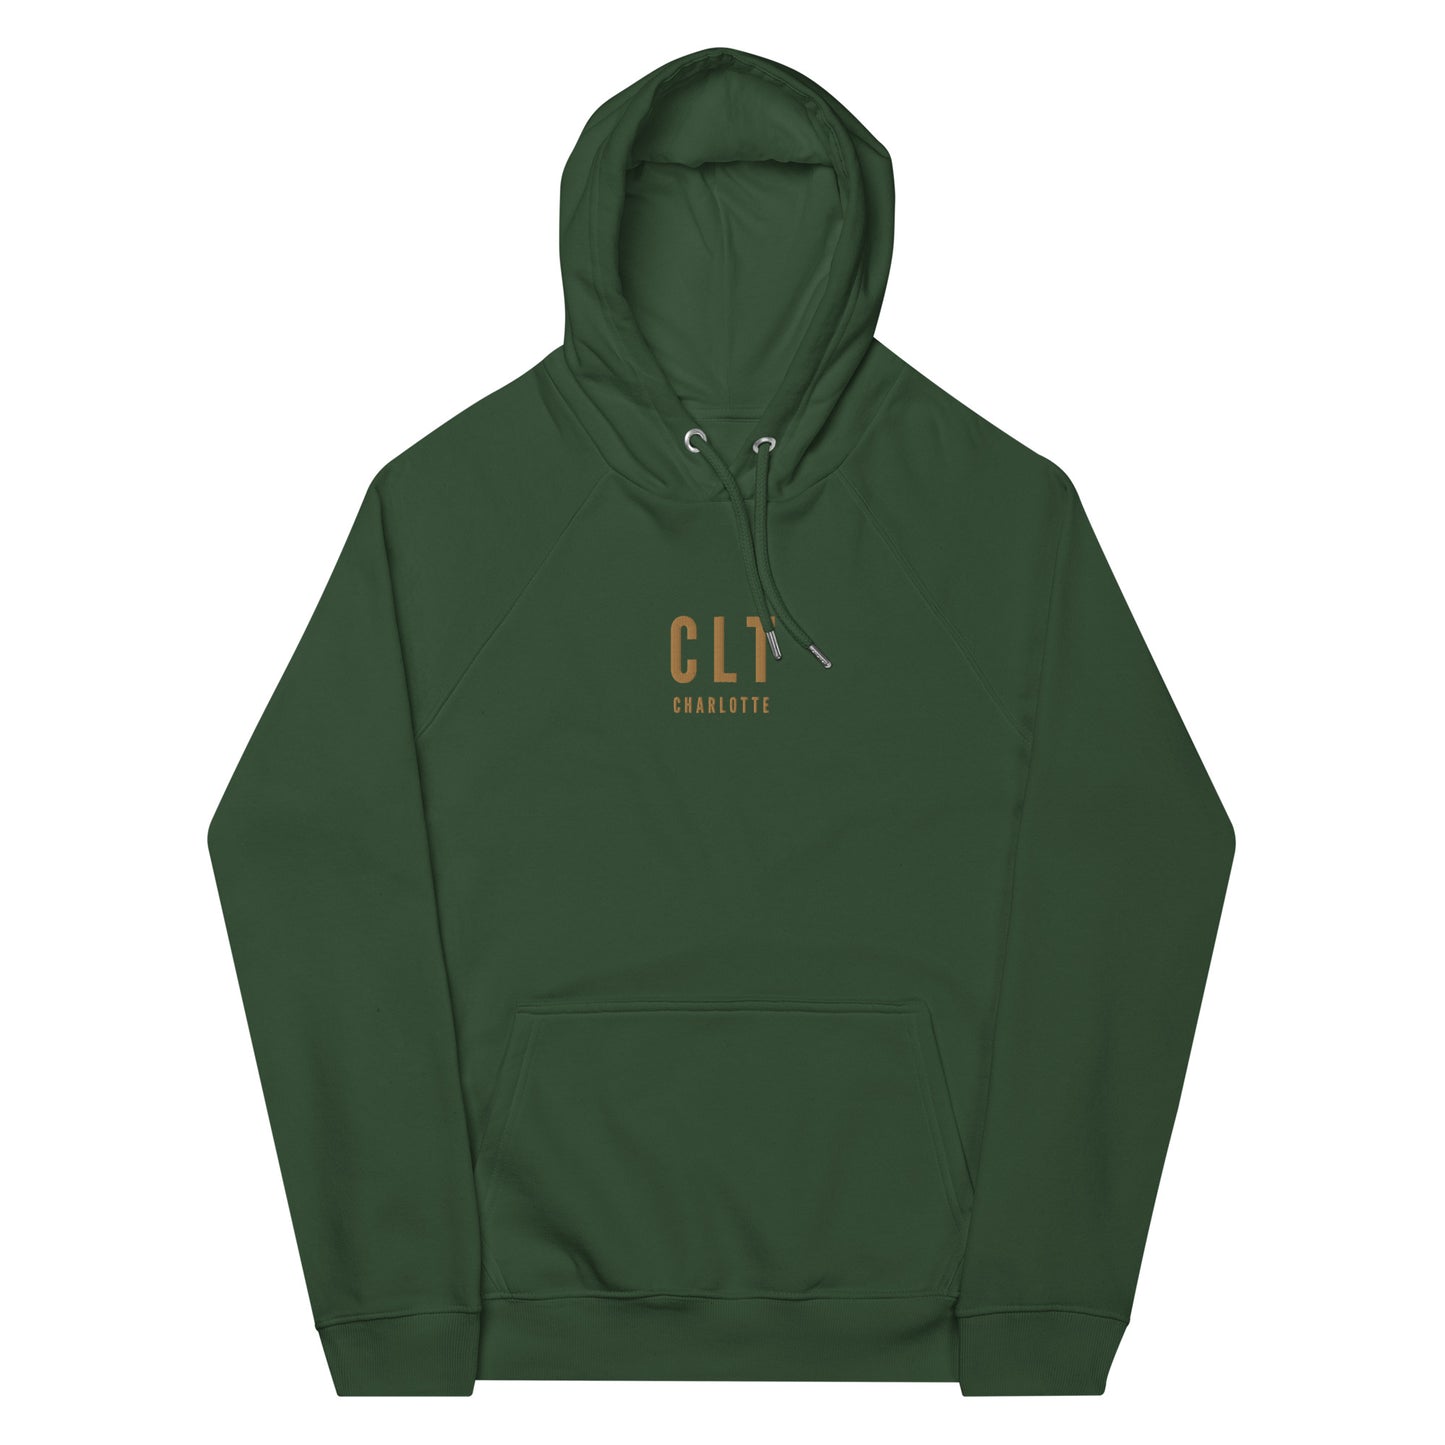 City Organic Hoodie - Old Gold • CLT Charlotte • YHM Designs - Image 01